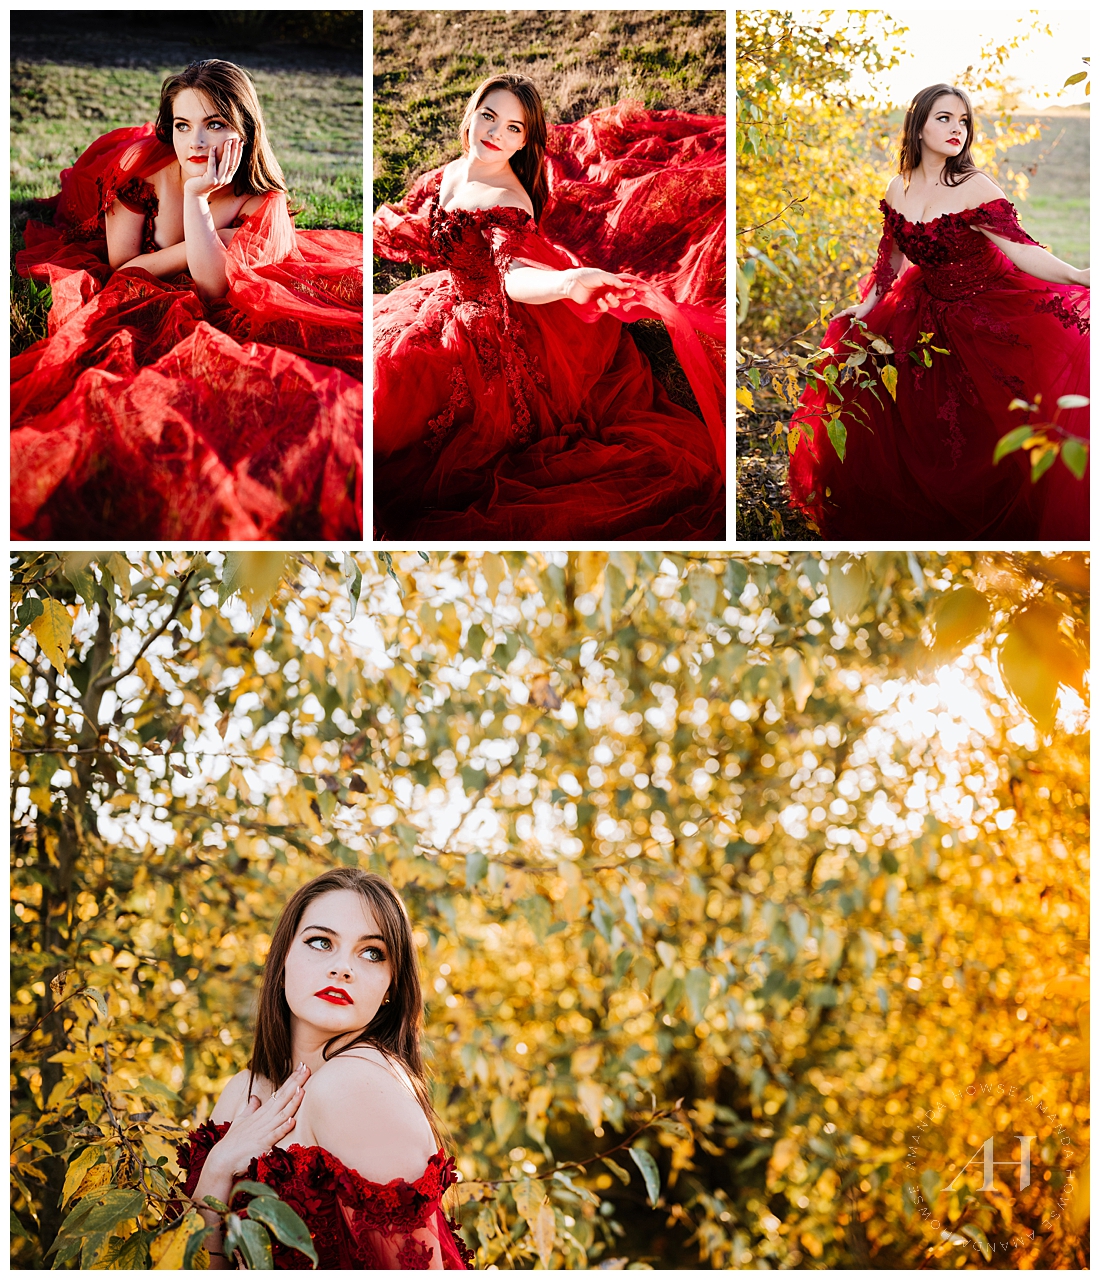 Dreamy, Red Dress Senior Portrait Shoot in Fall Leaves | Unique Senior Photo Ideas For High Schoolers | Amanda Howse Photography